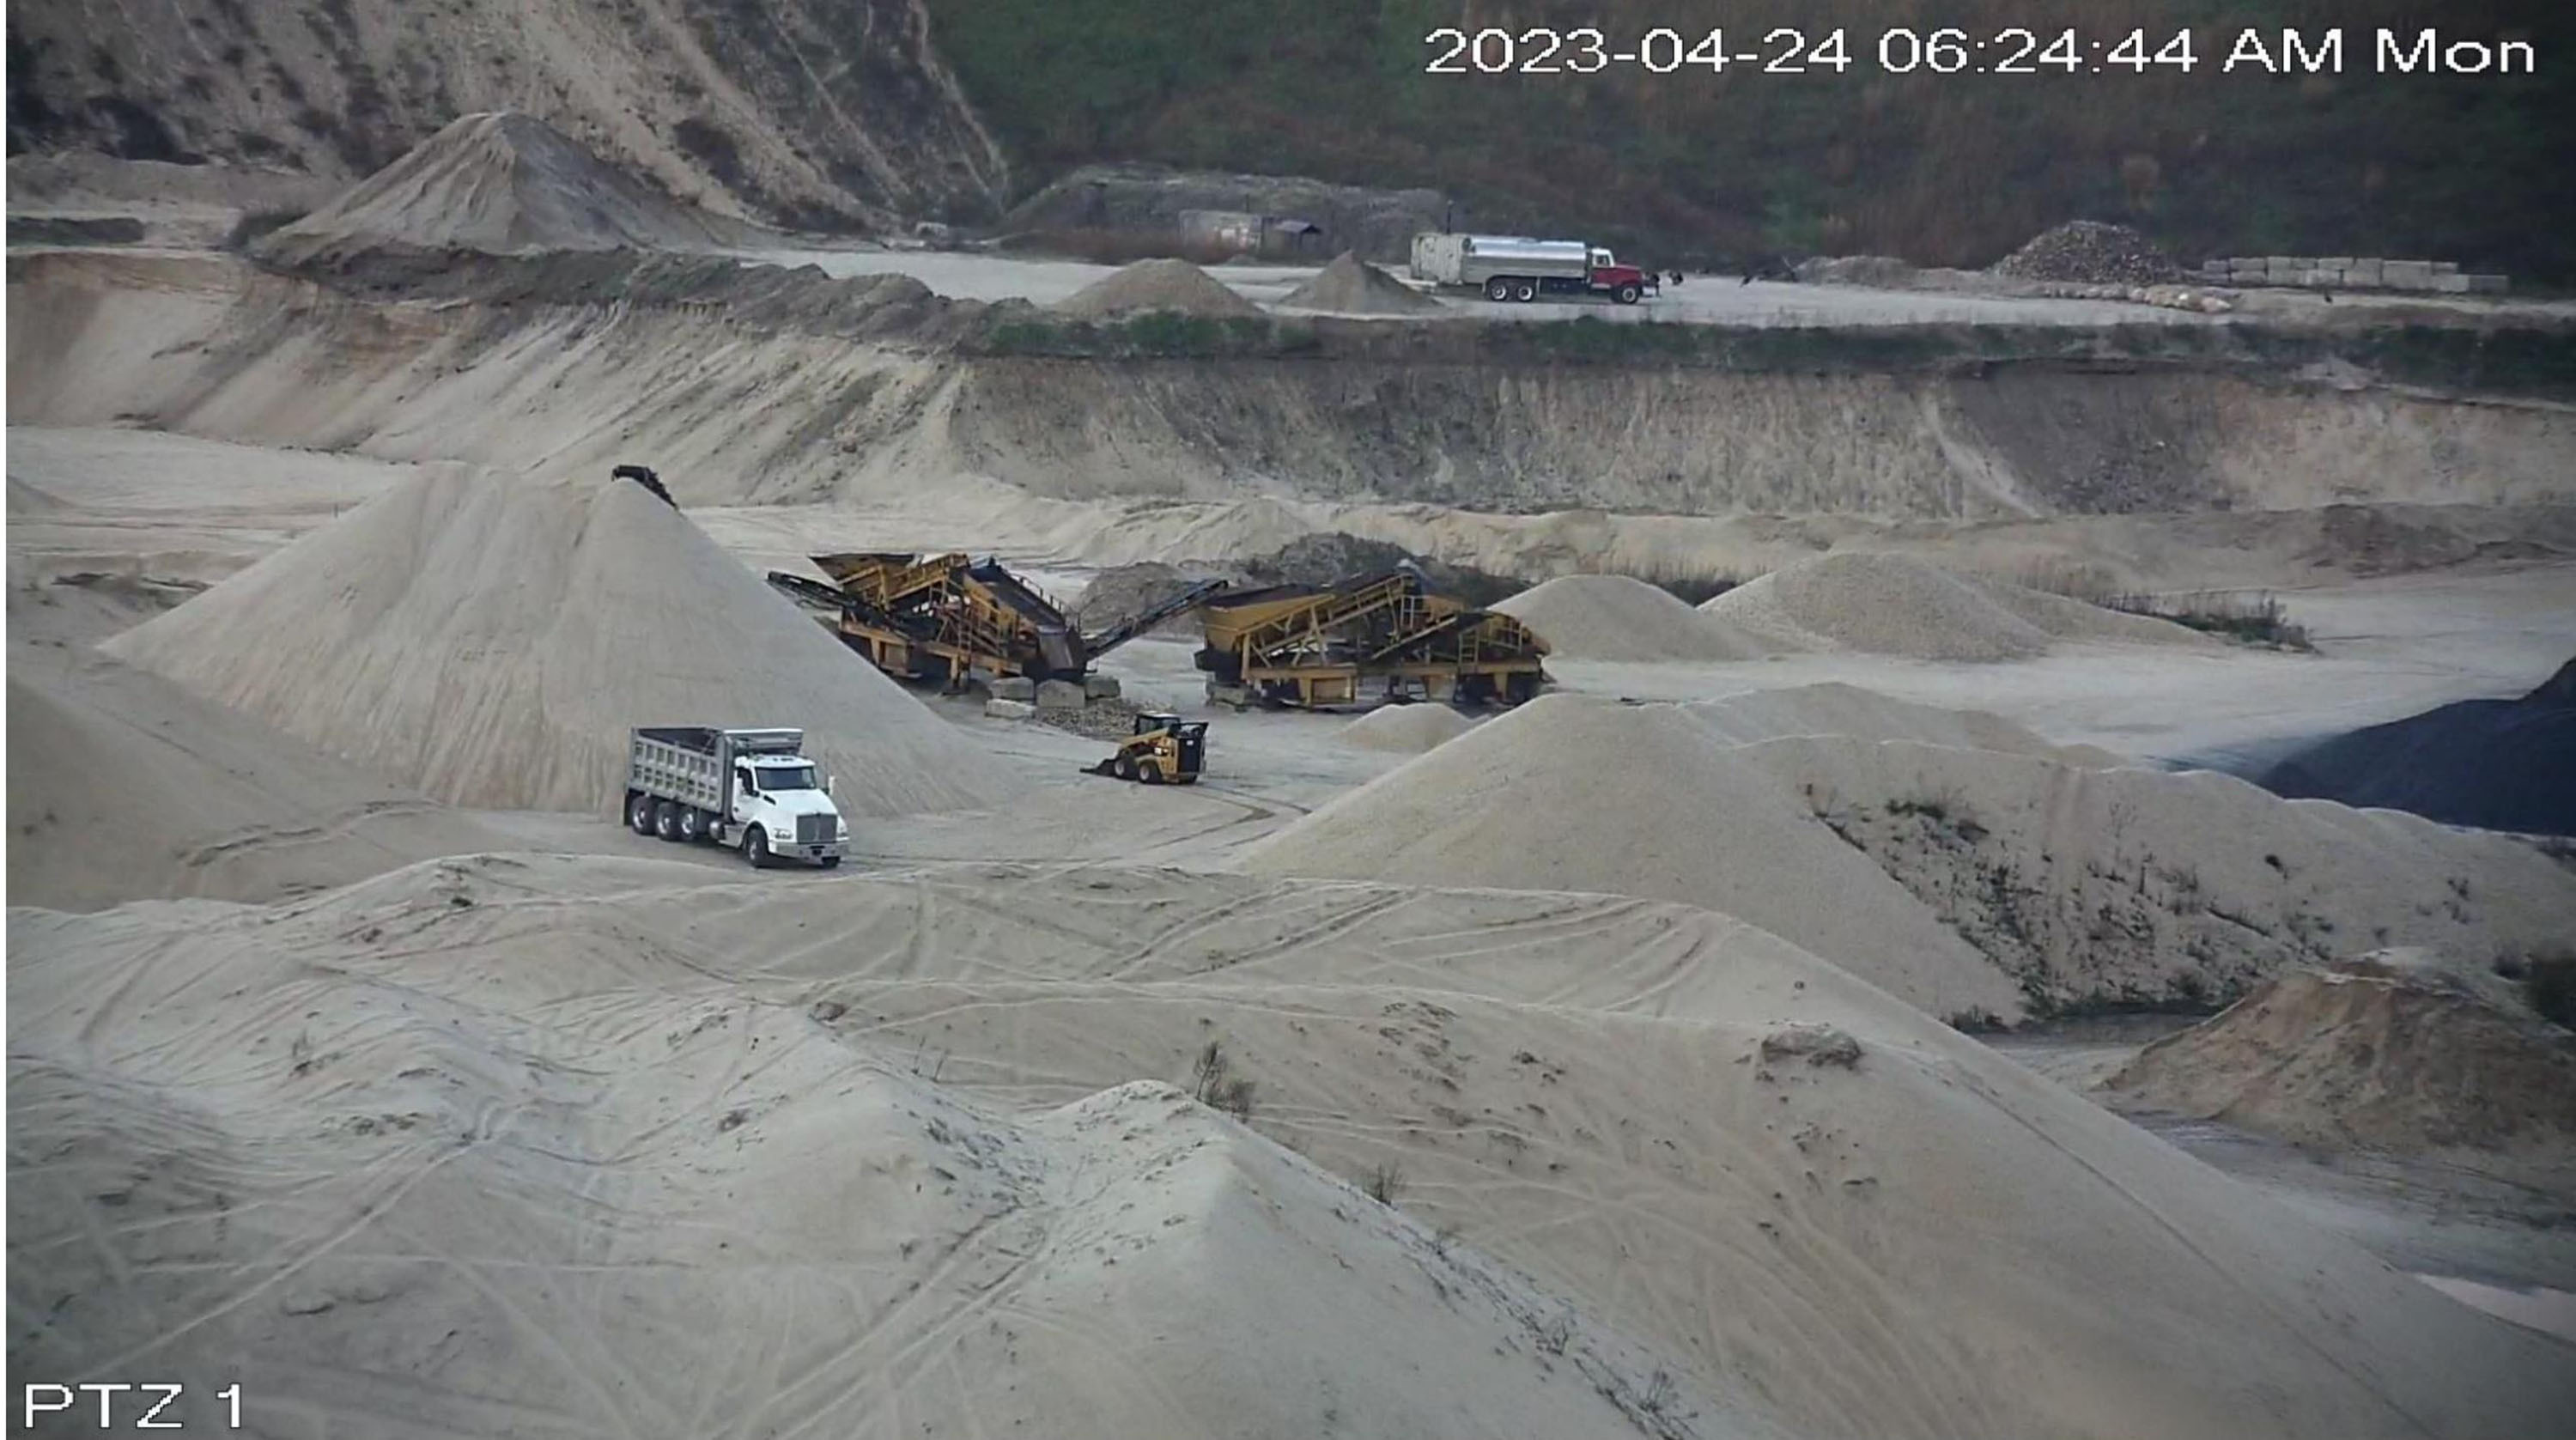 A photograph from a neighboring property shows activity at the Sand Land mine in Noyac.